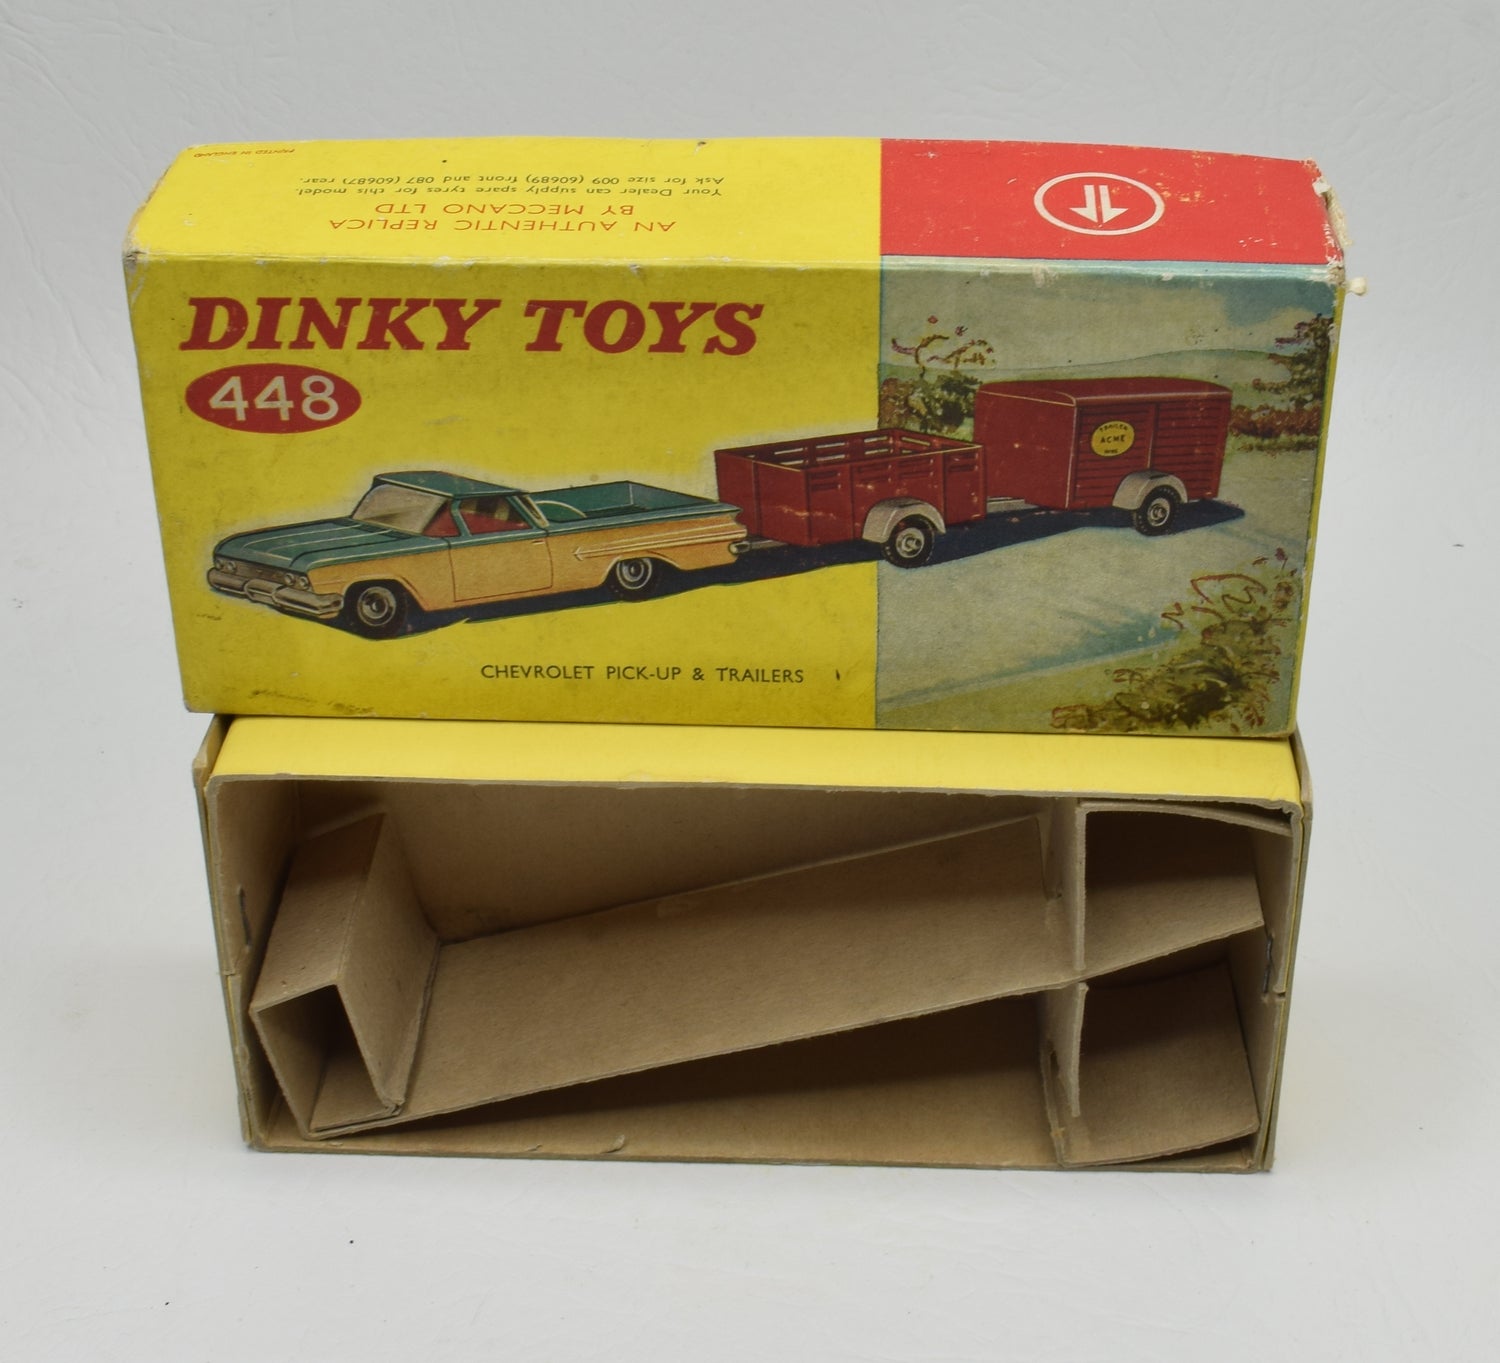 Dinky Toys 448 Chevrolet Pick Up & Trailers Very Near Mint Box